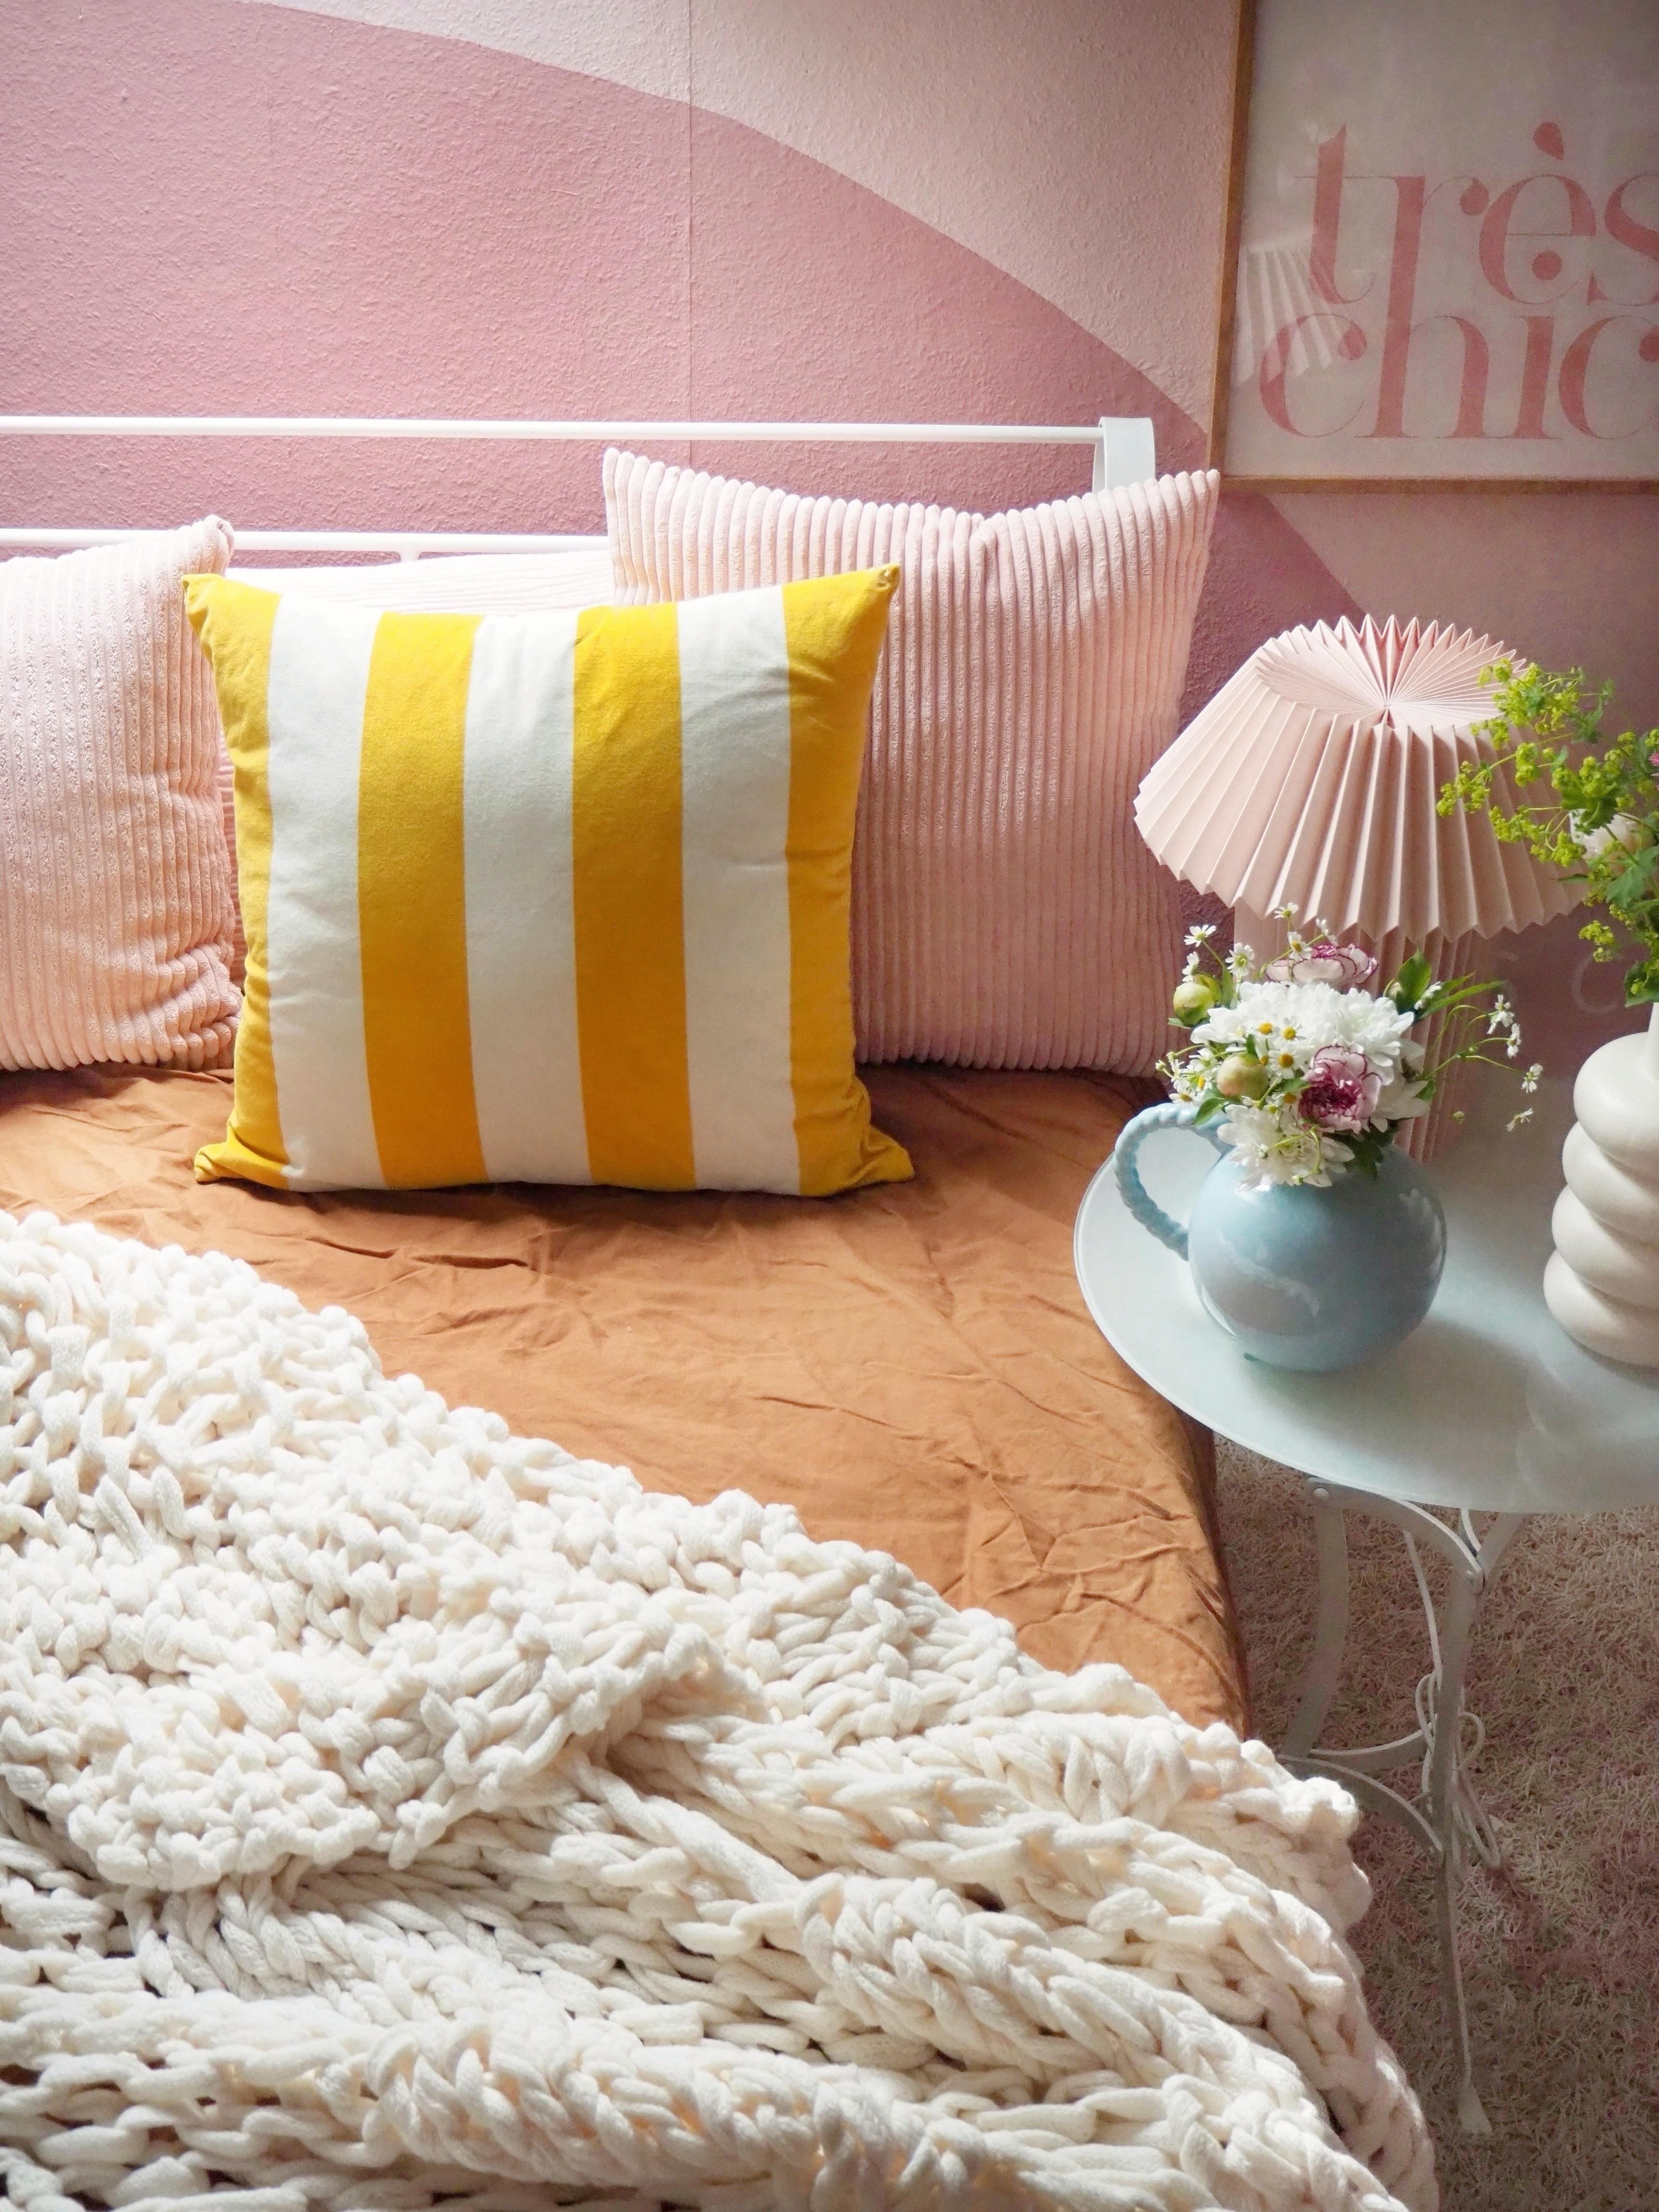 COZY.BDRM #cozyhome #bedroom #stripes #pastelcolours #streifenliebe #colourfulhome